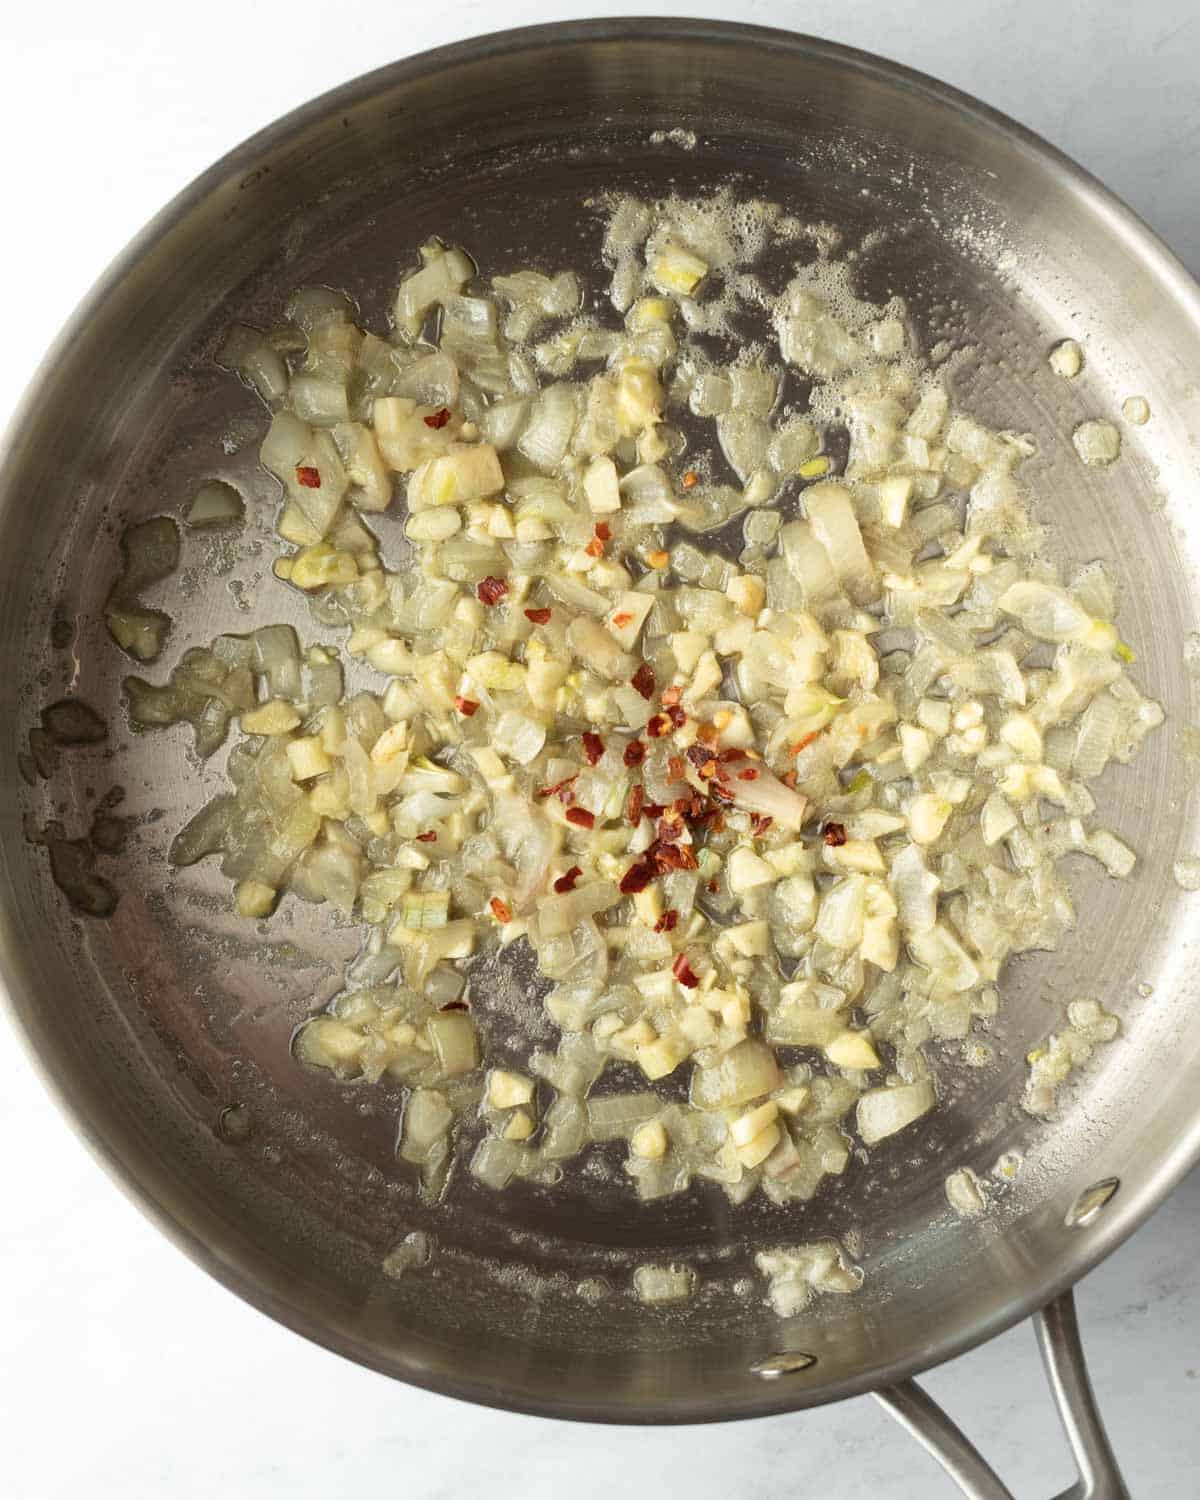 Sauteing shallot, garlic, and red pepper flakes in butter and oil.